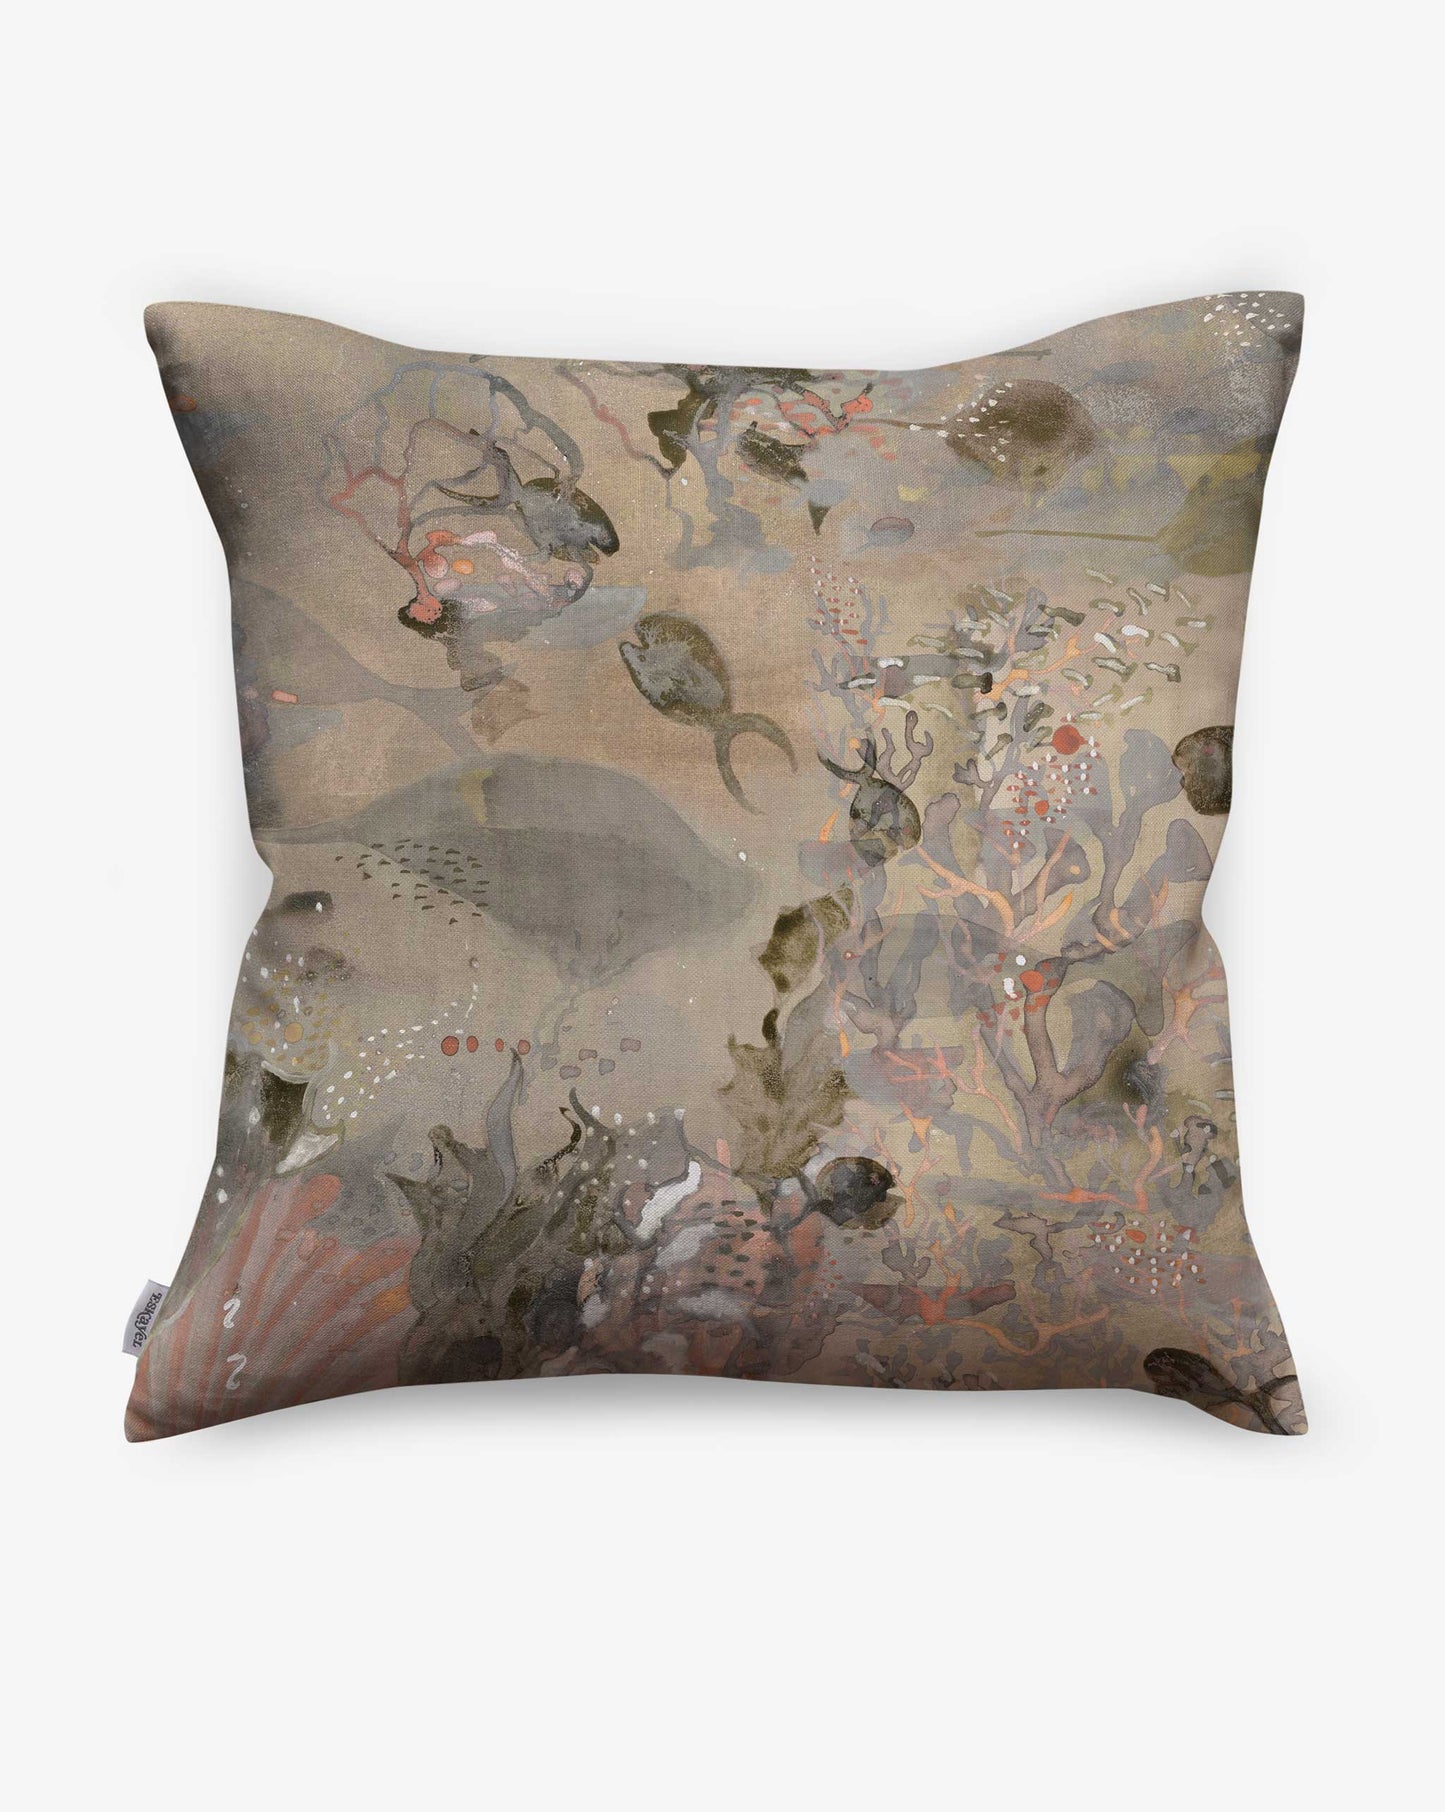 Eskayel Atoll pillows in the Sol colorway offer beige accents and modern neutrals.